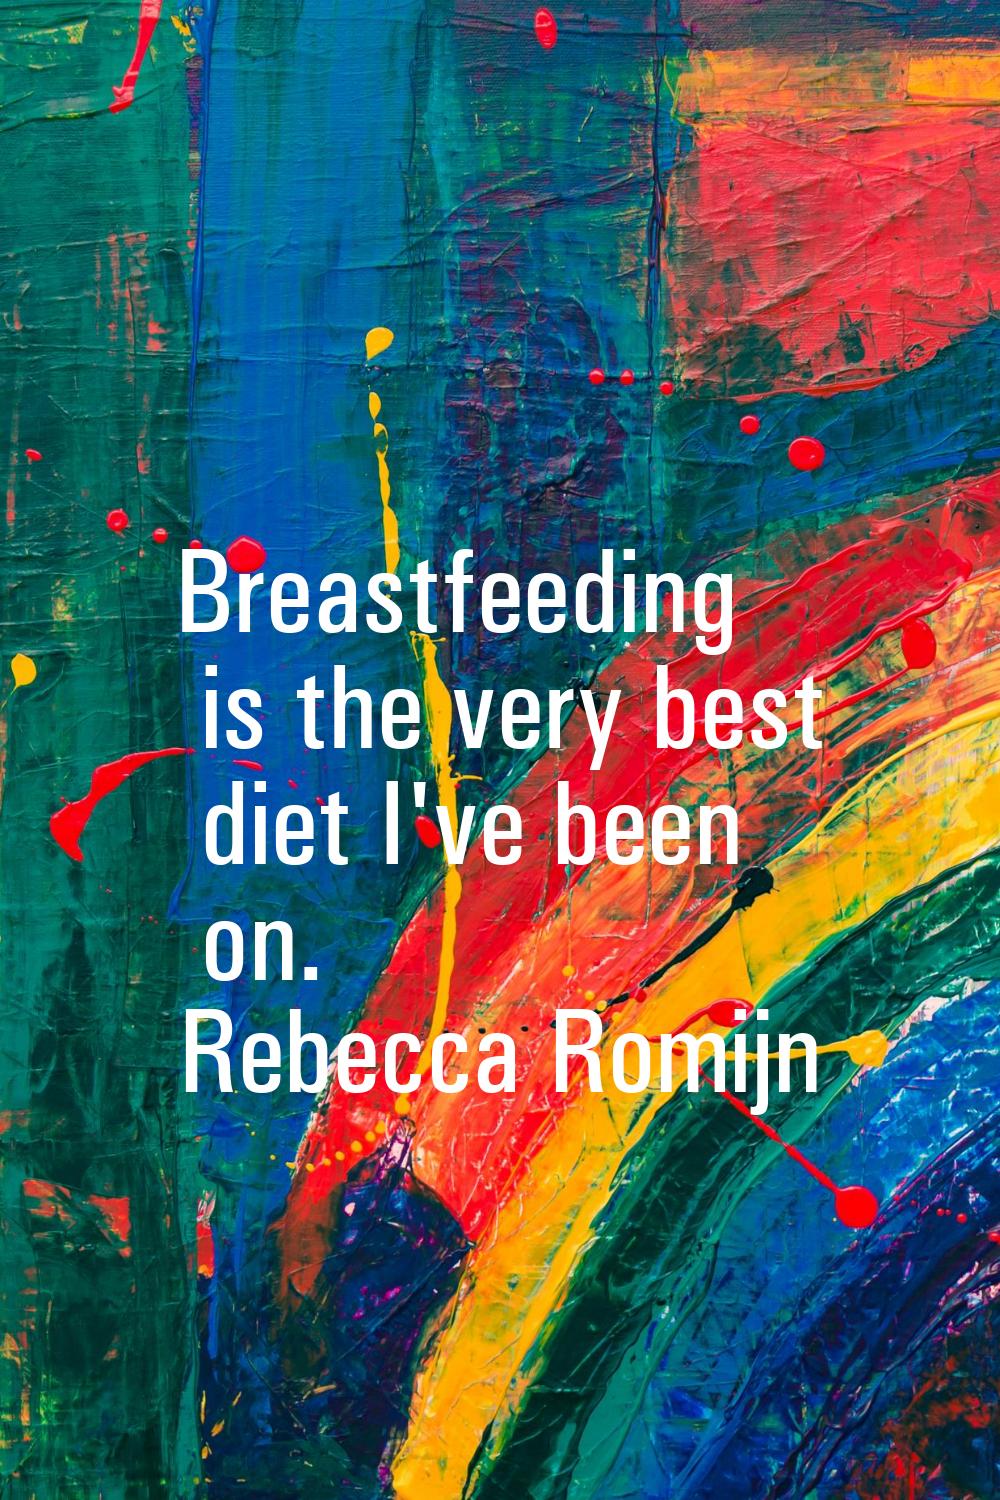 Breastfeeding is the very best diet I've been on.